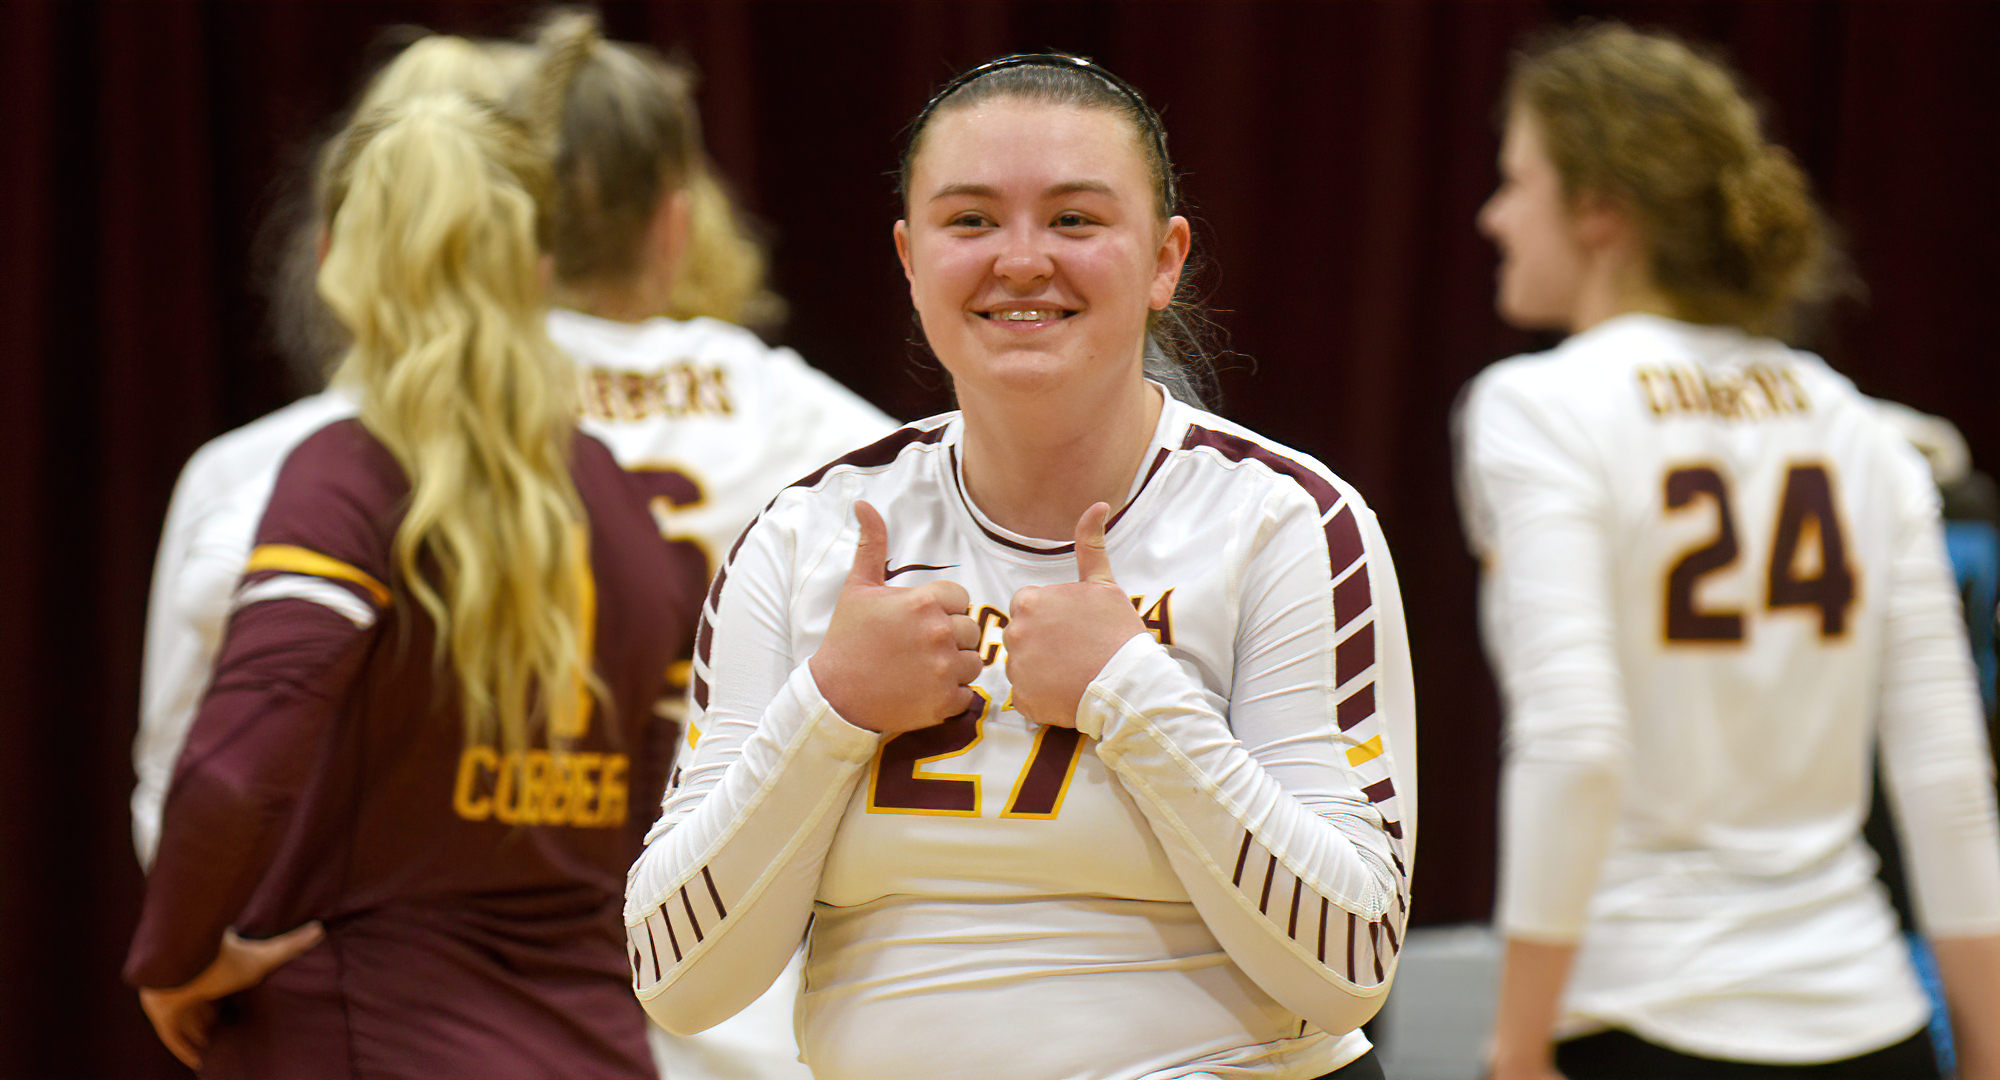 Senior Casey Coste was honored earlier in the year and helped the Cobbers post a decisive 3-1 win over St. Ben's in the final match of the year.